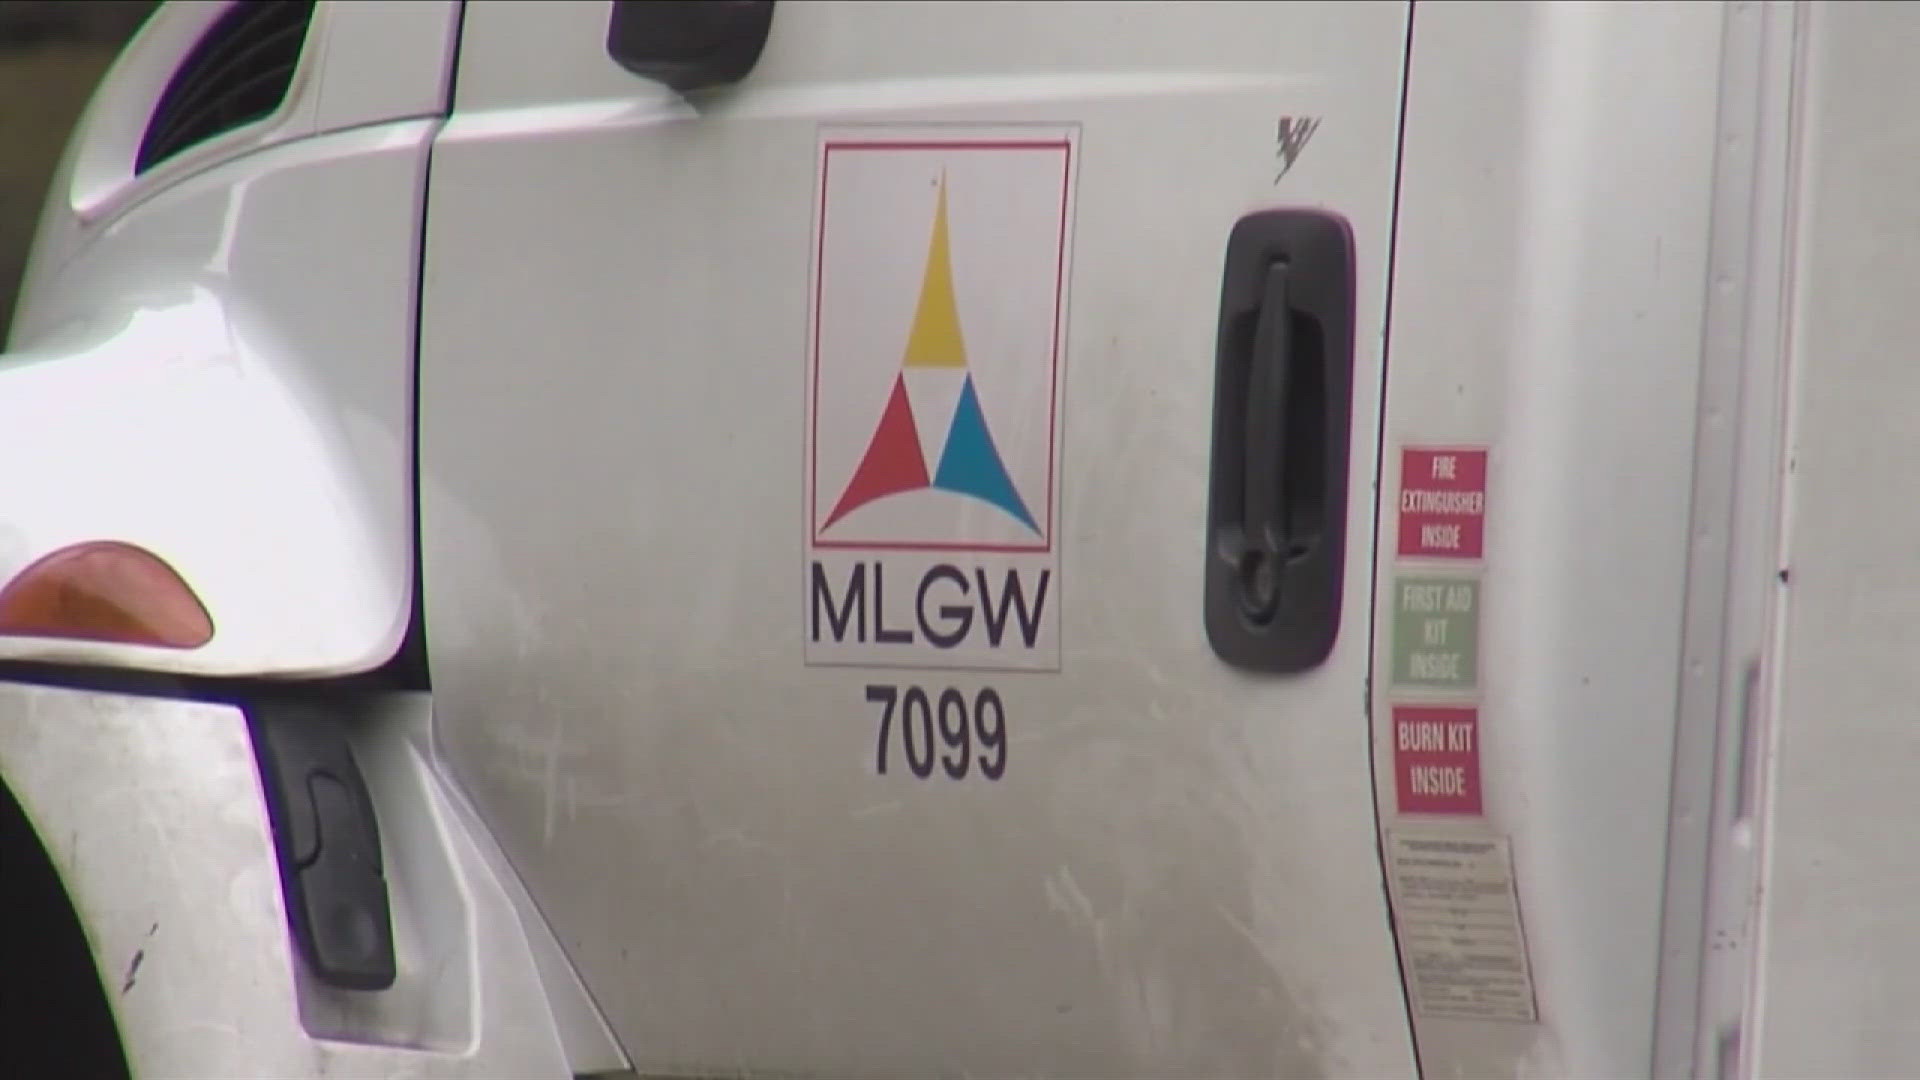 When MLGW raises rates, the Memphis suburbs have no say since the board members live in the city. This could change.